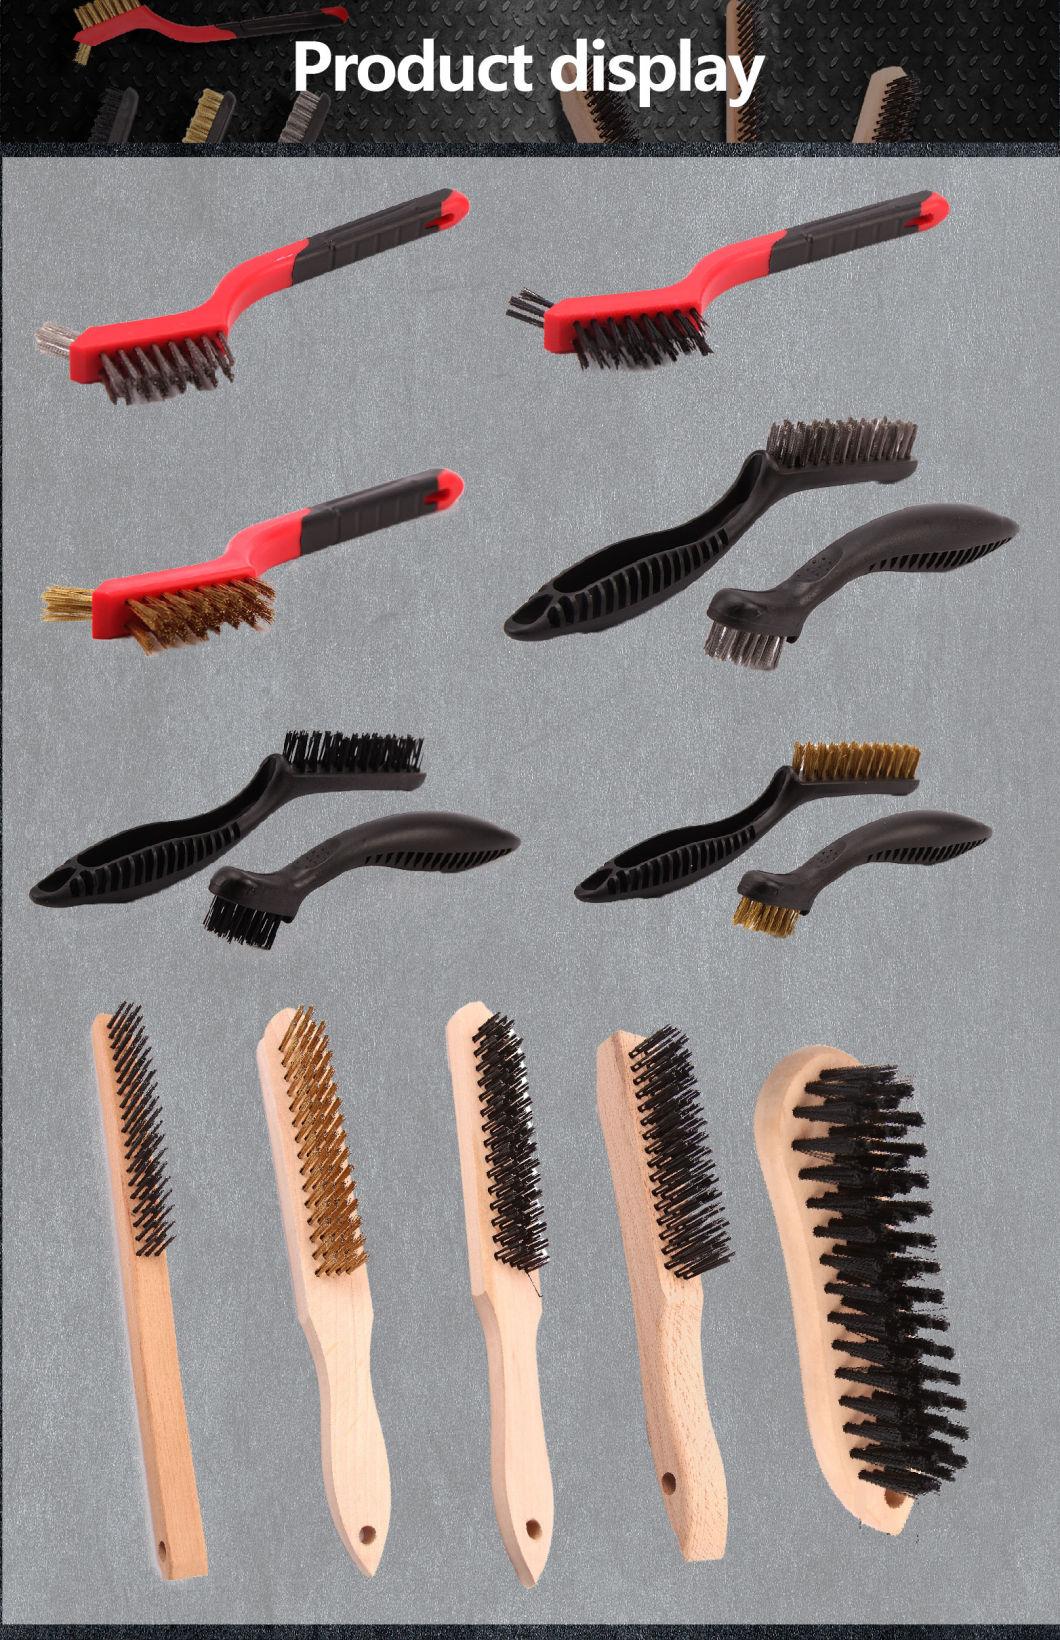 Brass/ Stainless Steel/ Nylon Brushes for Cleaning Rust Removal